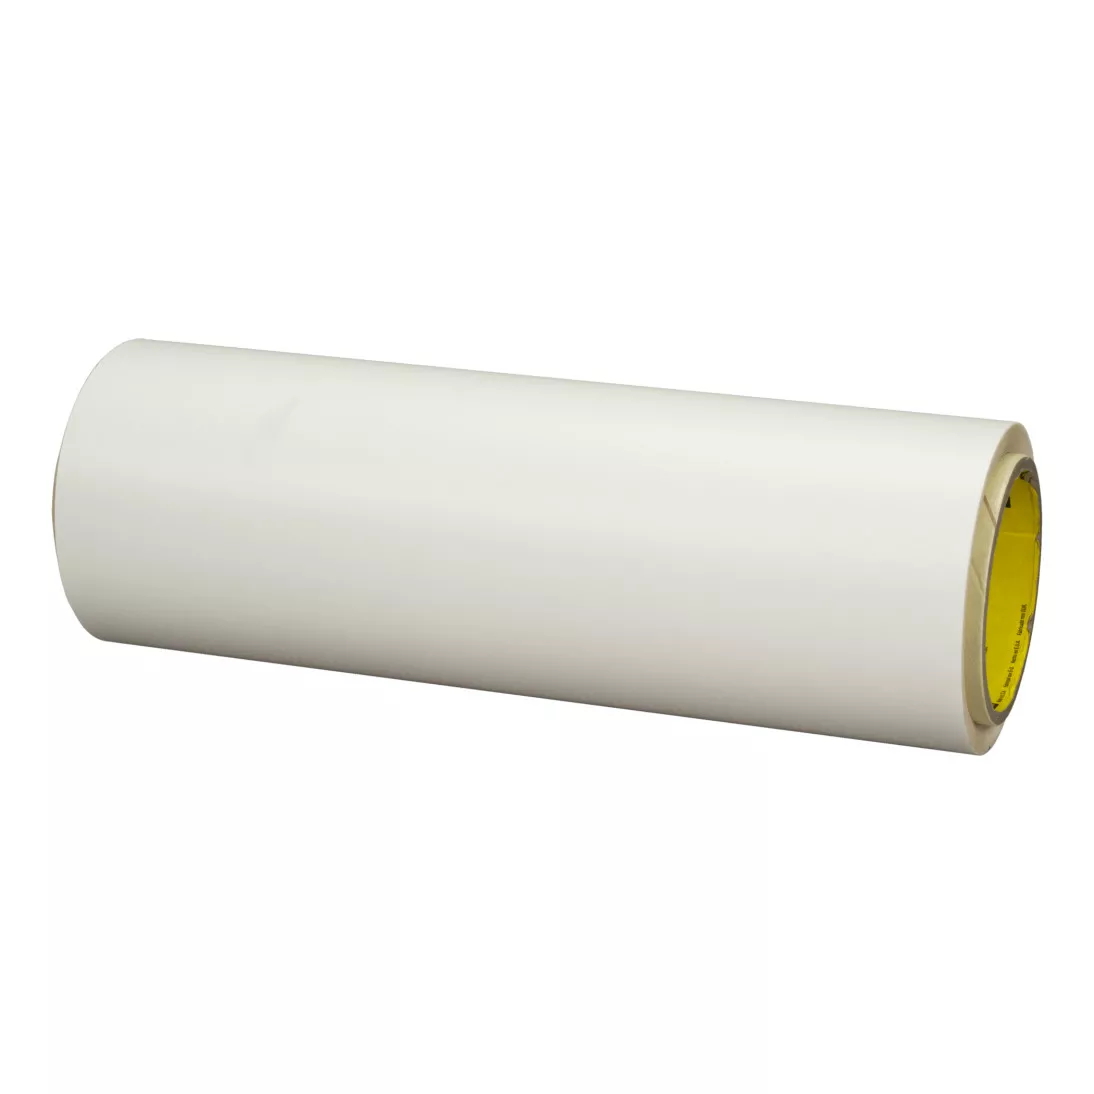 3M™ Adhesive Transfer Tape 9773WL, Clear, 54 in x 180 yd, 3 mil, 1 roll
per case